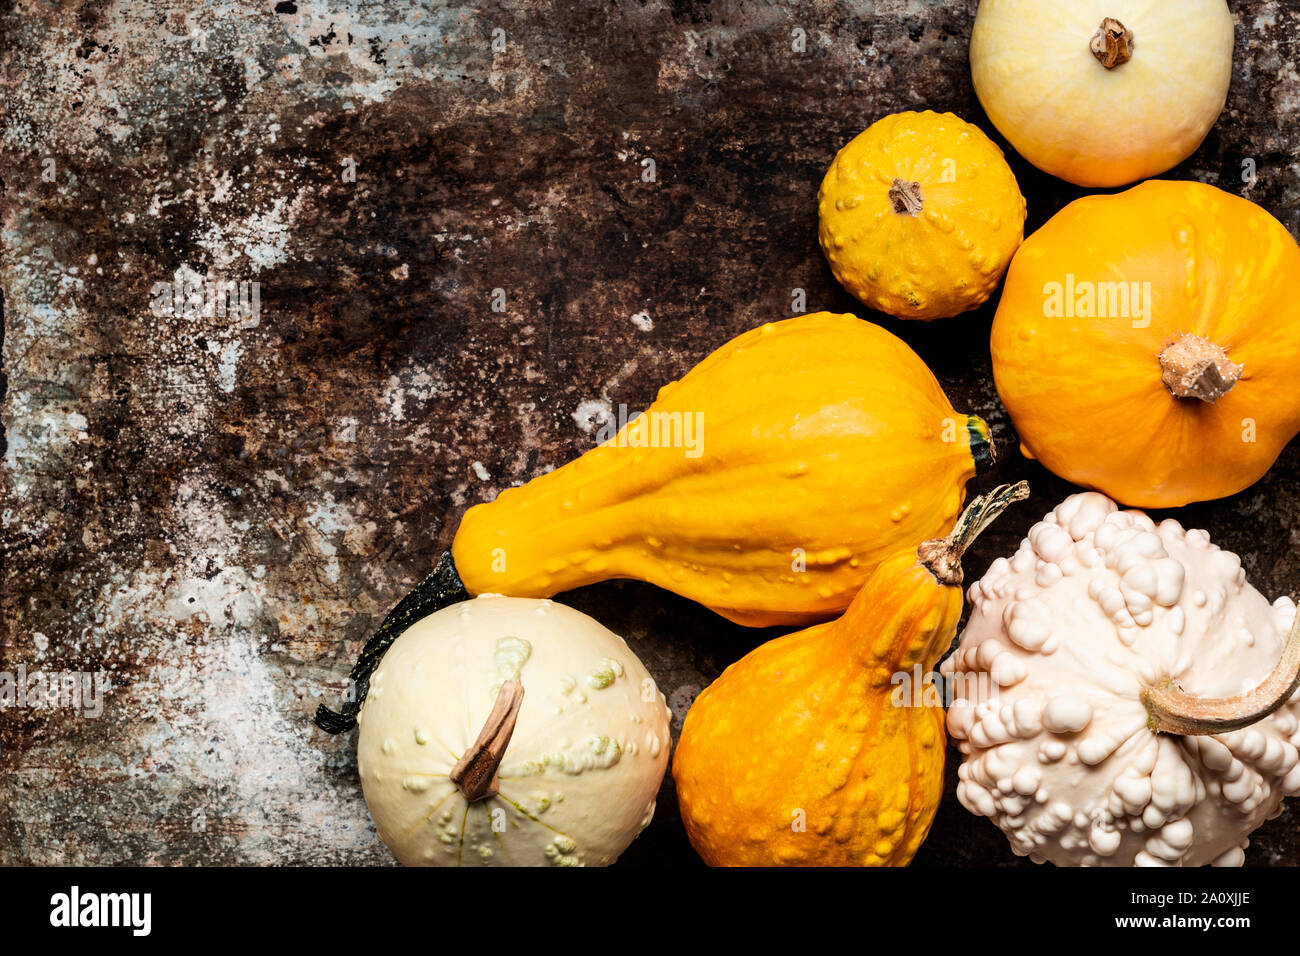 Happy Thanksgiving Background. Little decorative pumpkins on rustic metal background with copy space. Autumn Harvest and Holiday minimal still life. Stock Photo